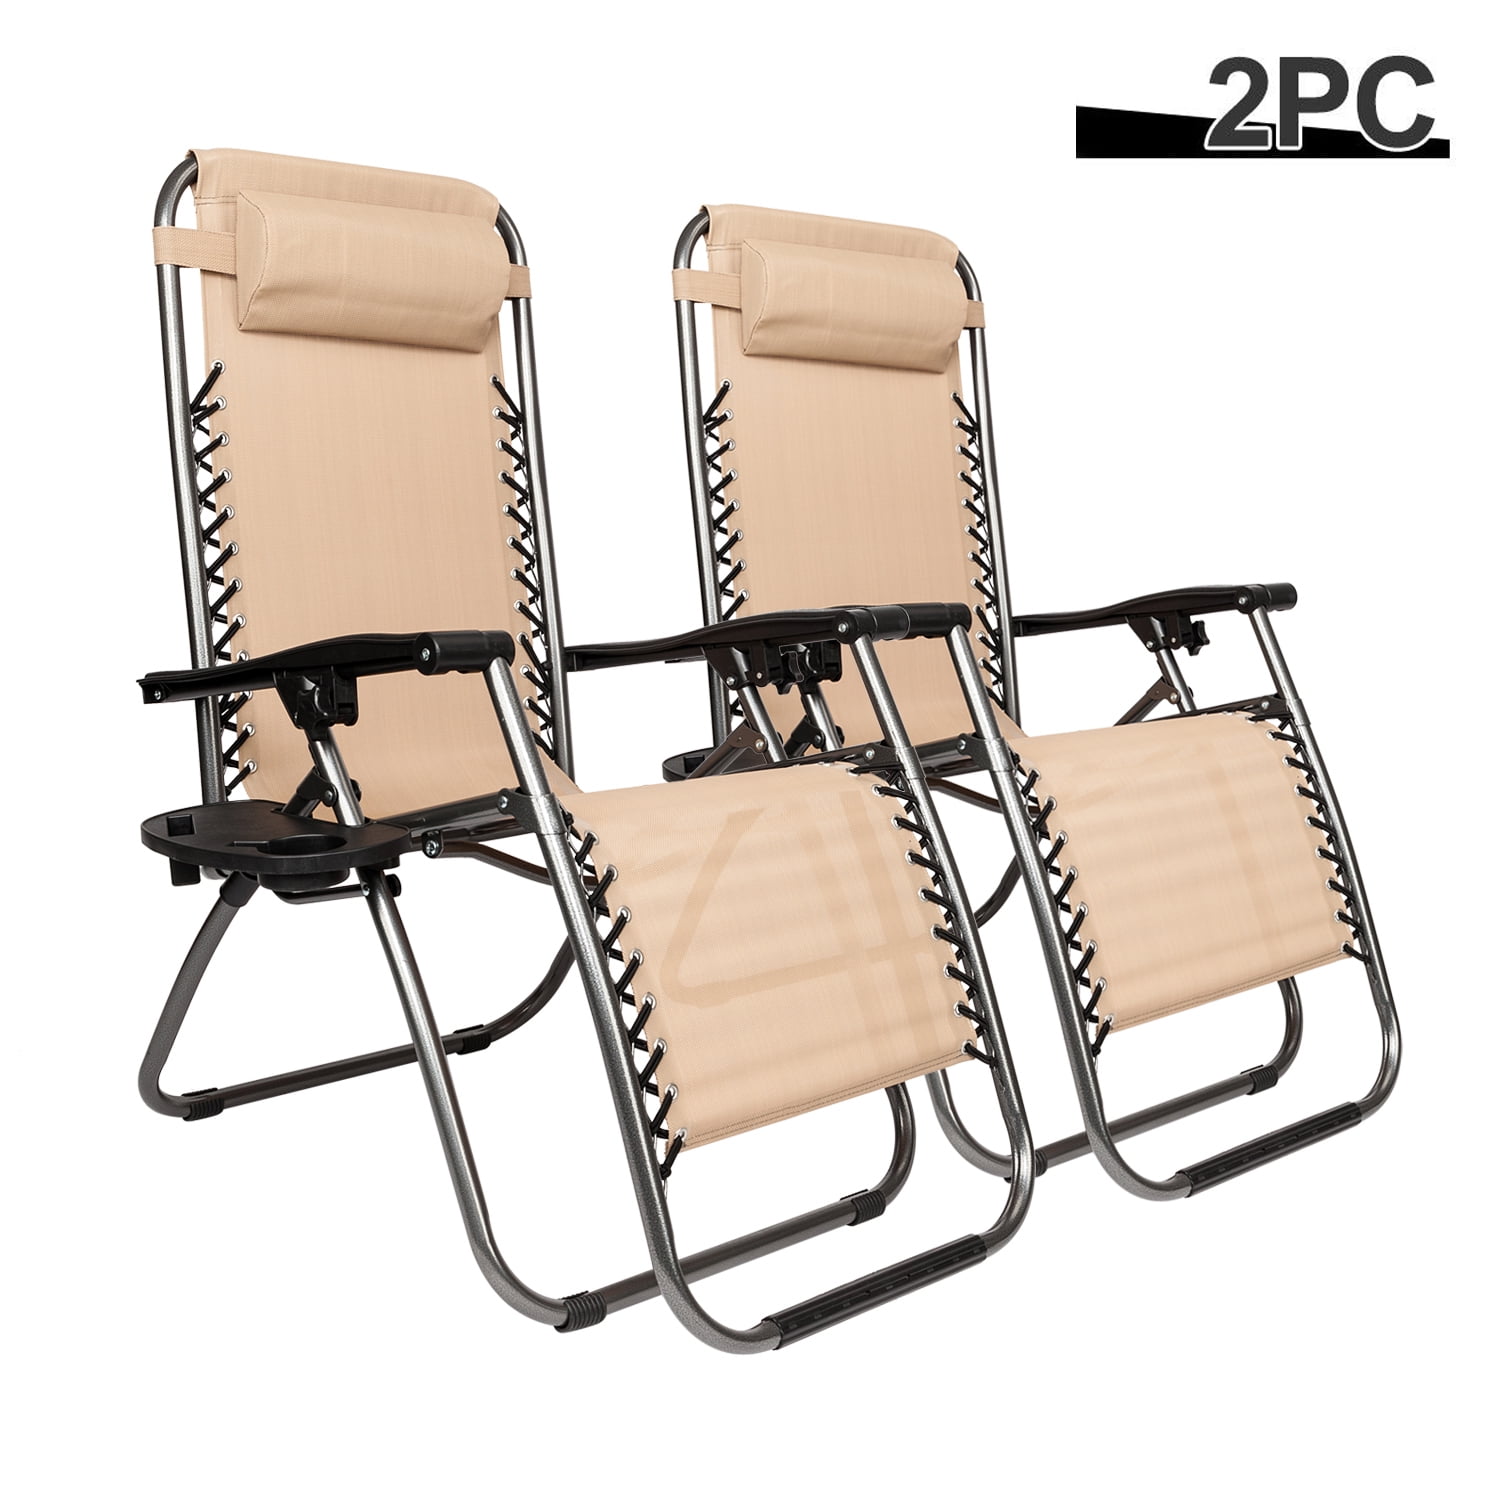 Light Grey Set of 2 Zero Gravity Outdoor Lounge Chairs w/Sunshade Snack Tray Cup Holder with Mobile Device Slot Adjustable Folding Patio Reclining Chairs W/Canopy 